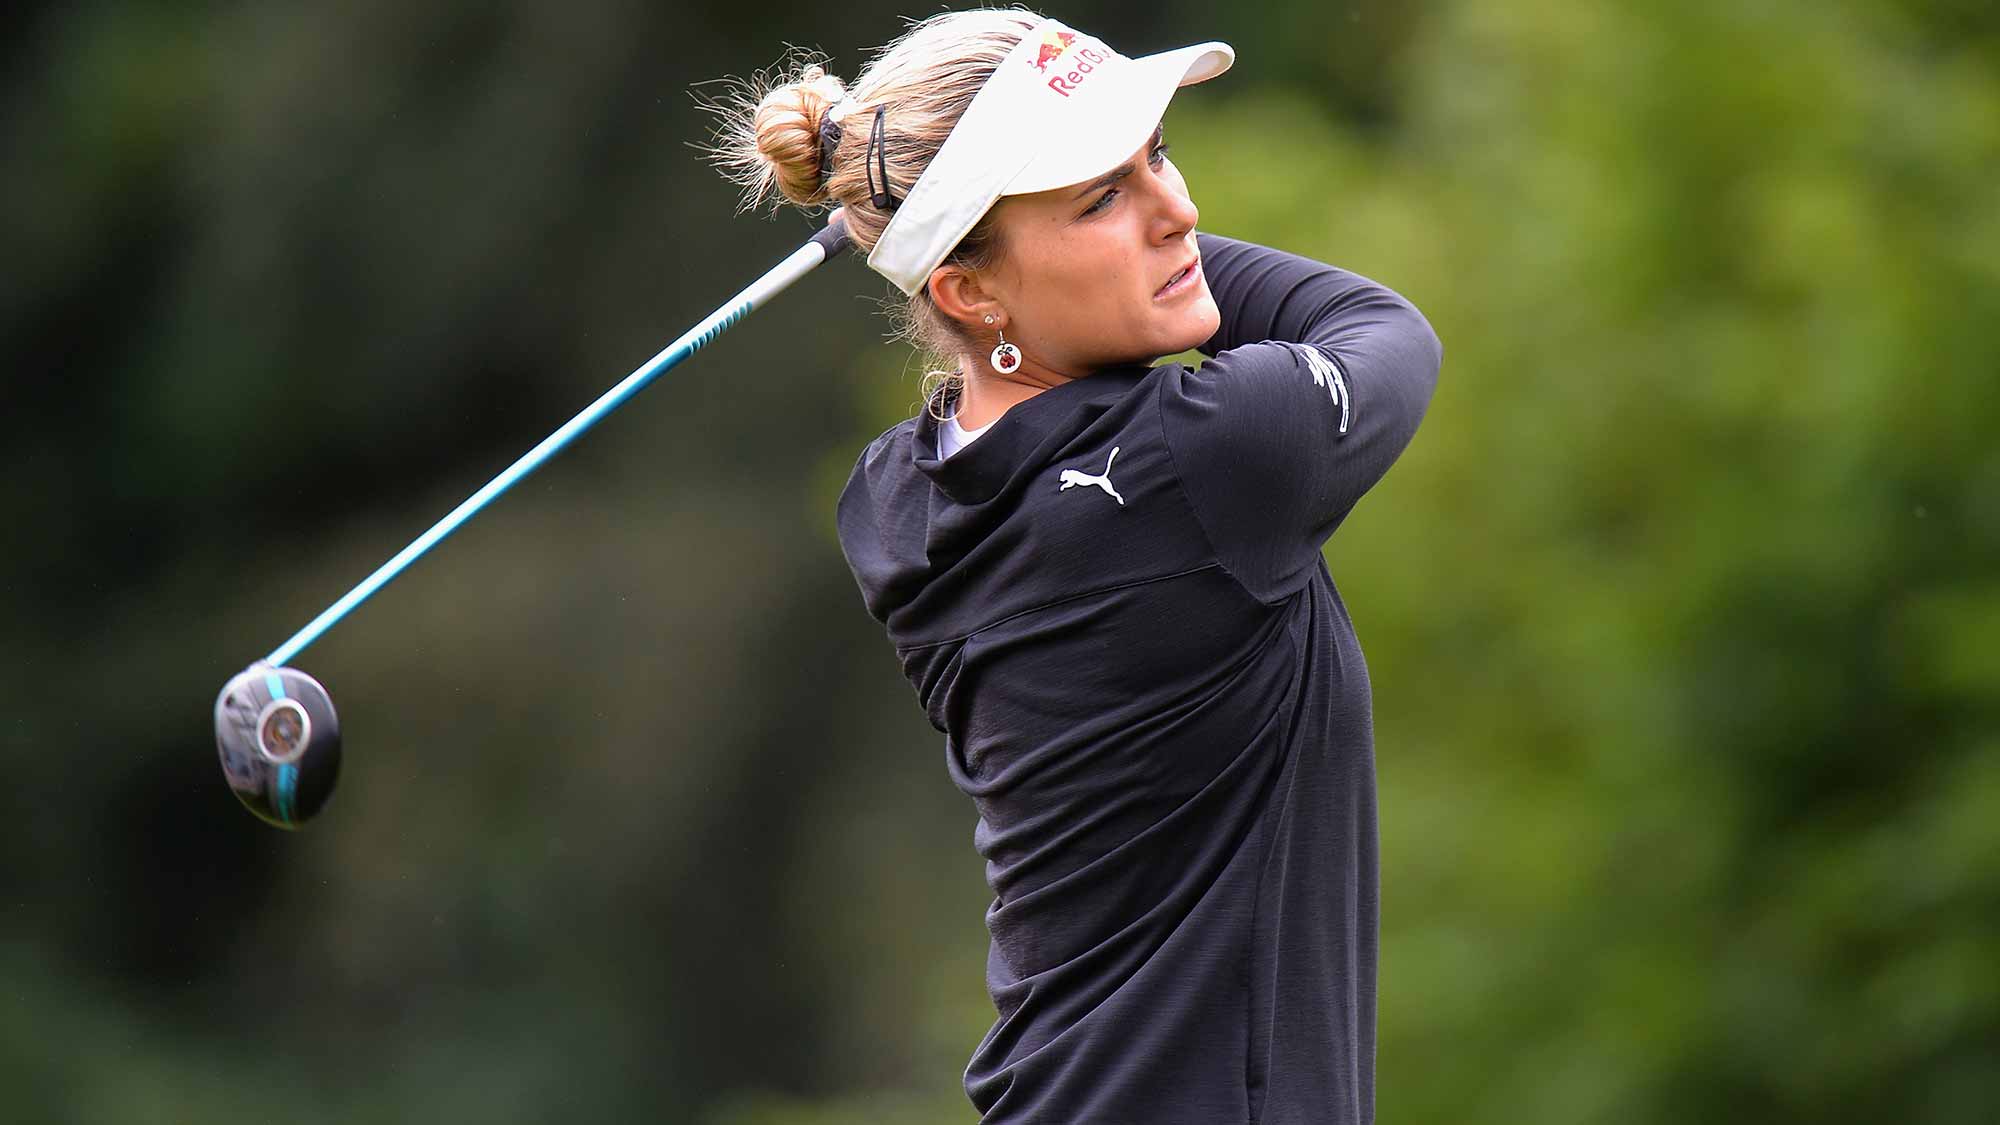 Lexi Thompson of USA plays her first shot on the 4th tee during the Ricoh Women's British Open